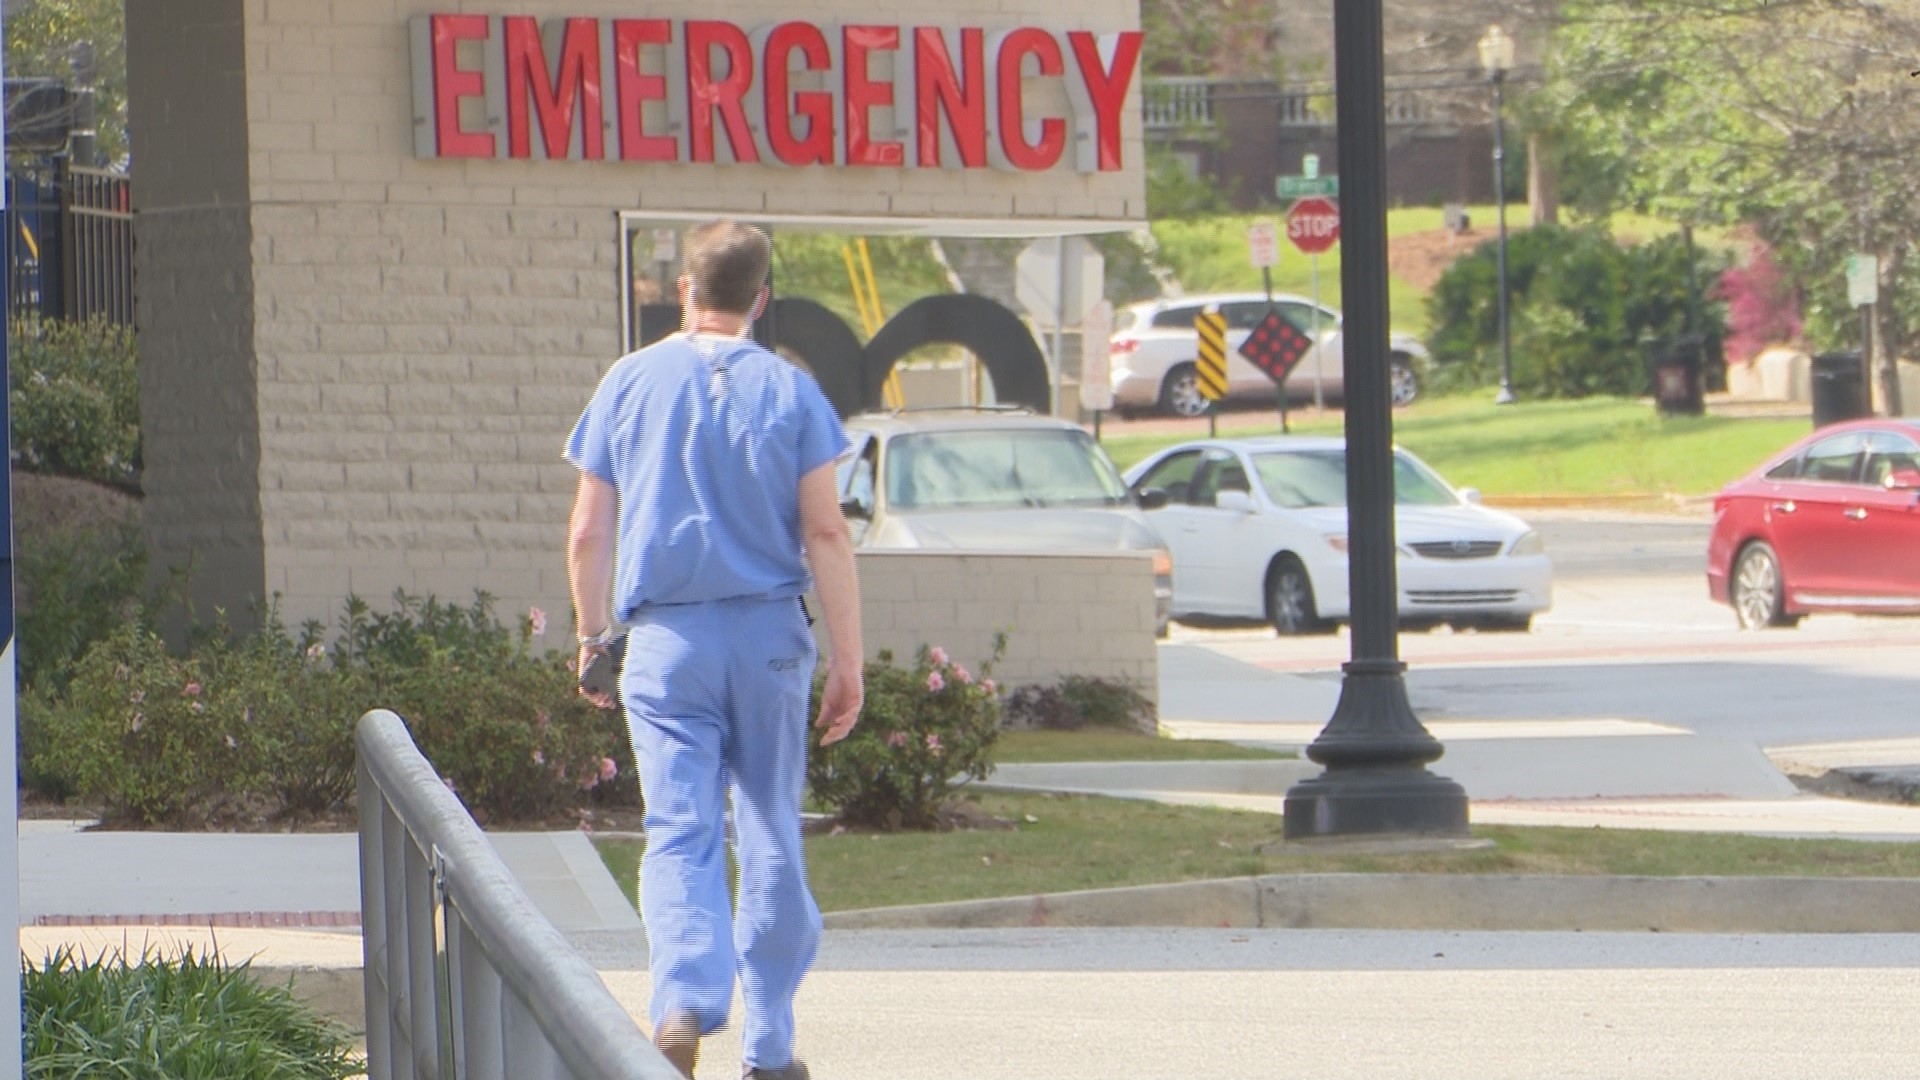 Two confirmed cases are being treated at the Macon hospital now